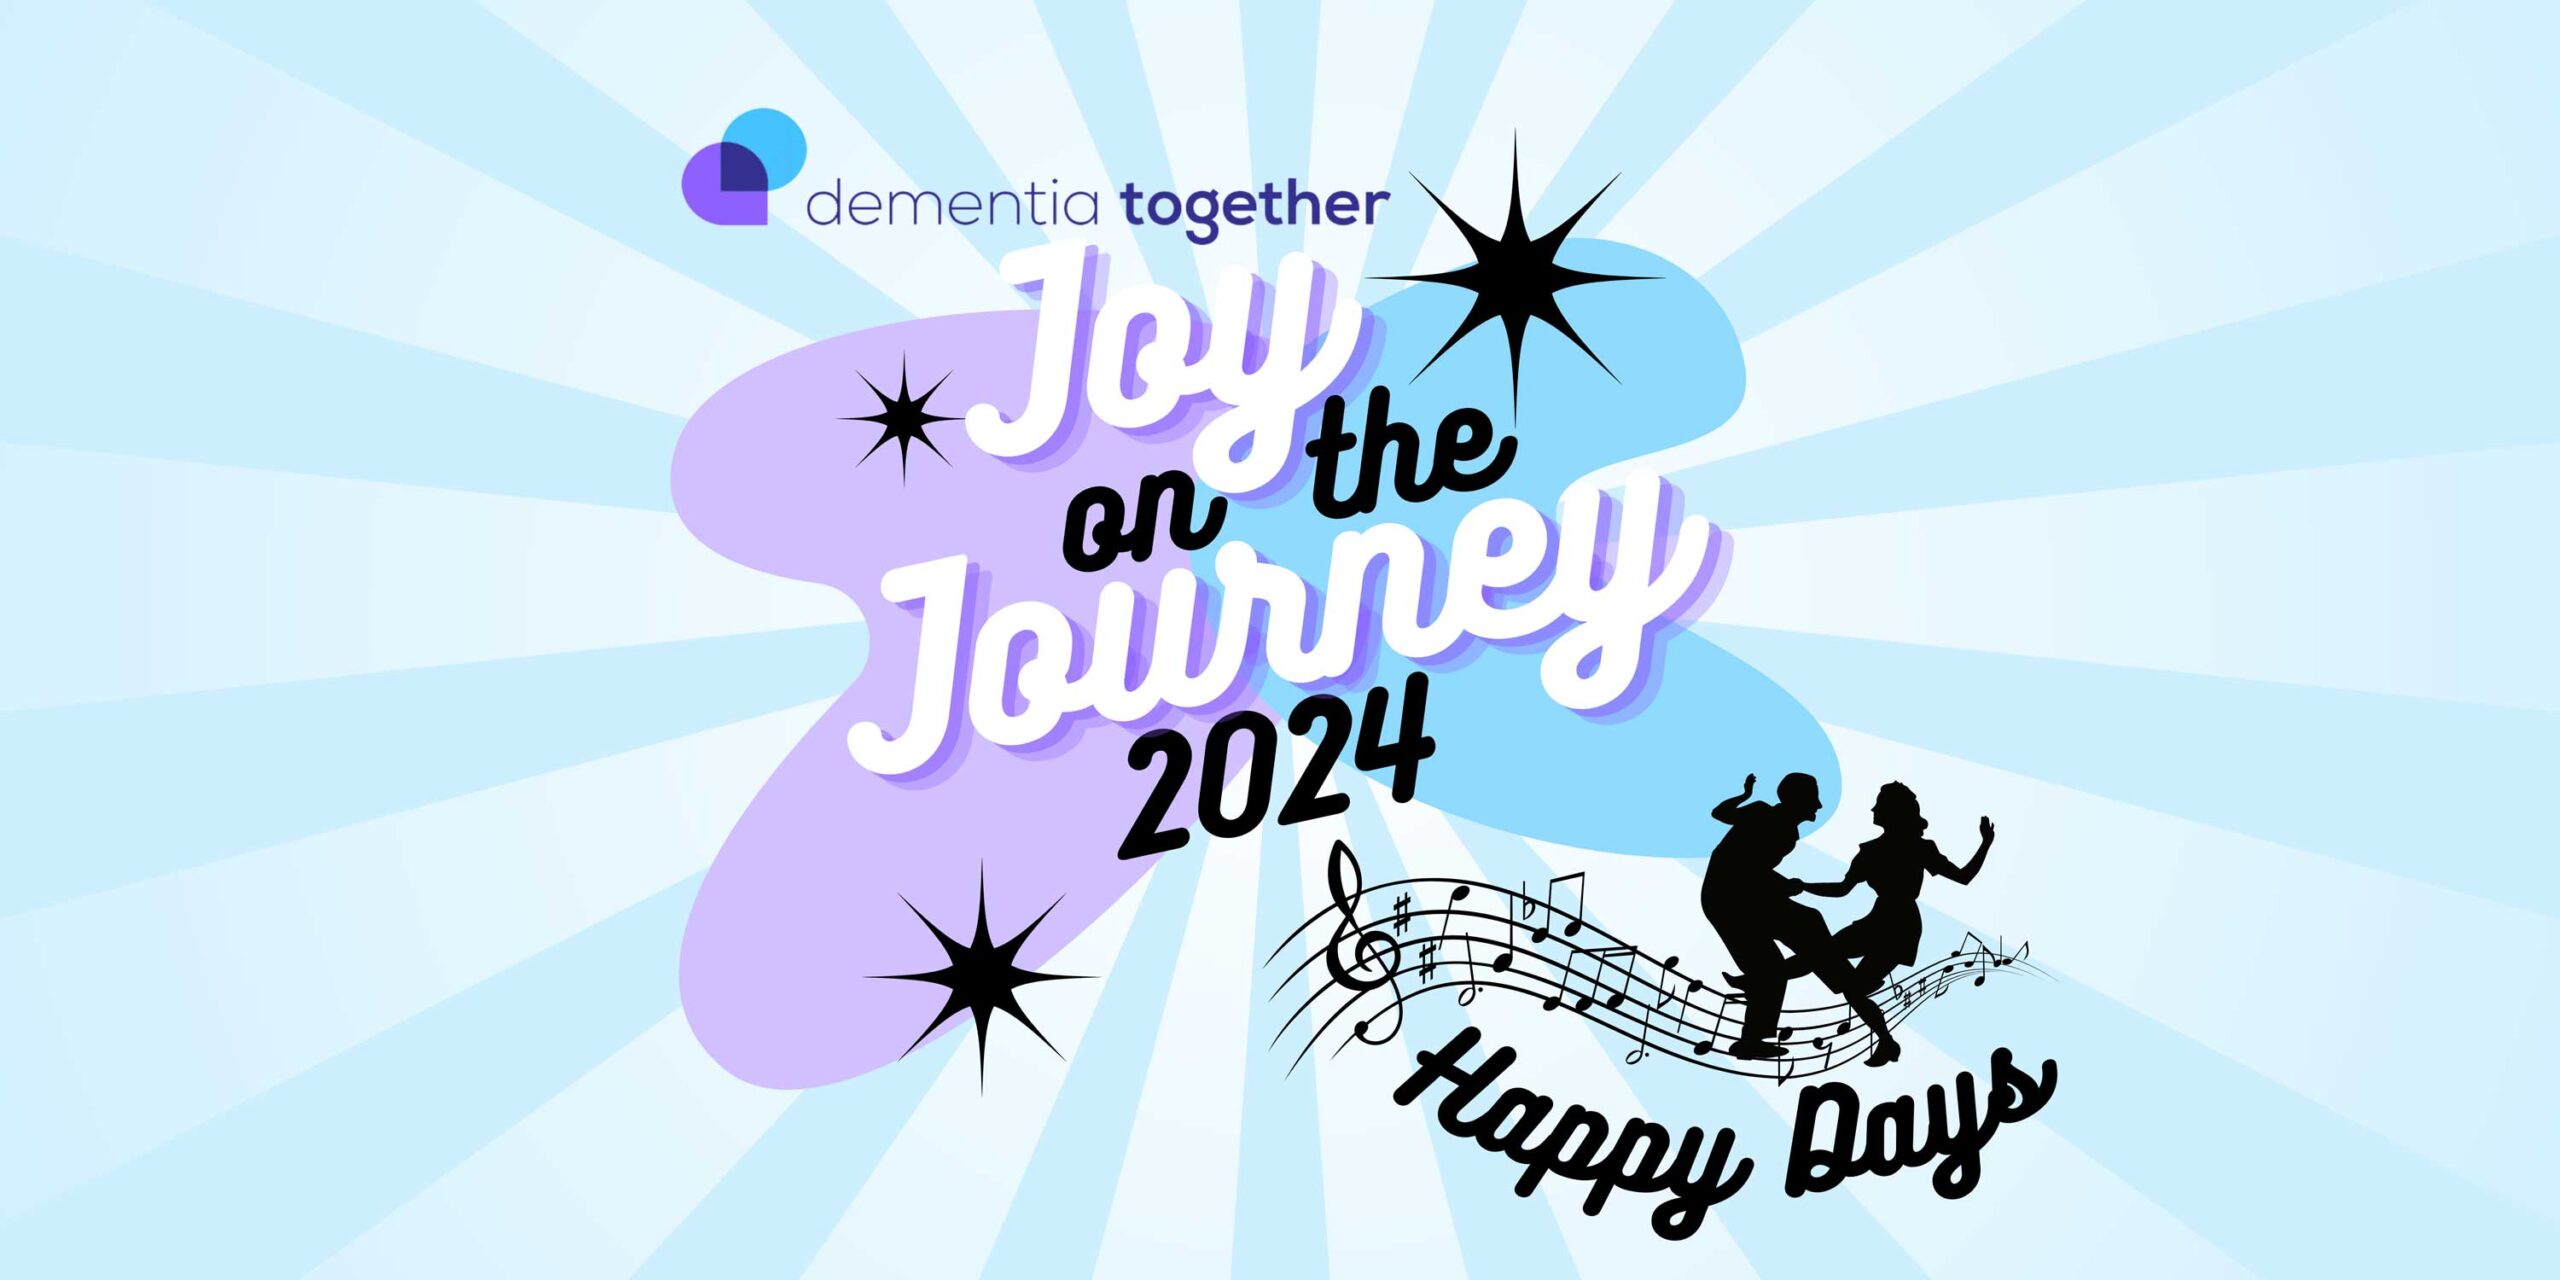 Joy on the Journey 2024 Logo with purple and blue background. Silhouetted image of people dancing with music notes and text that says "Happy Days"